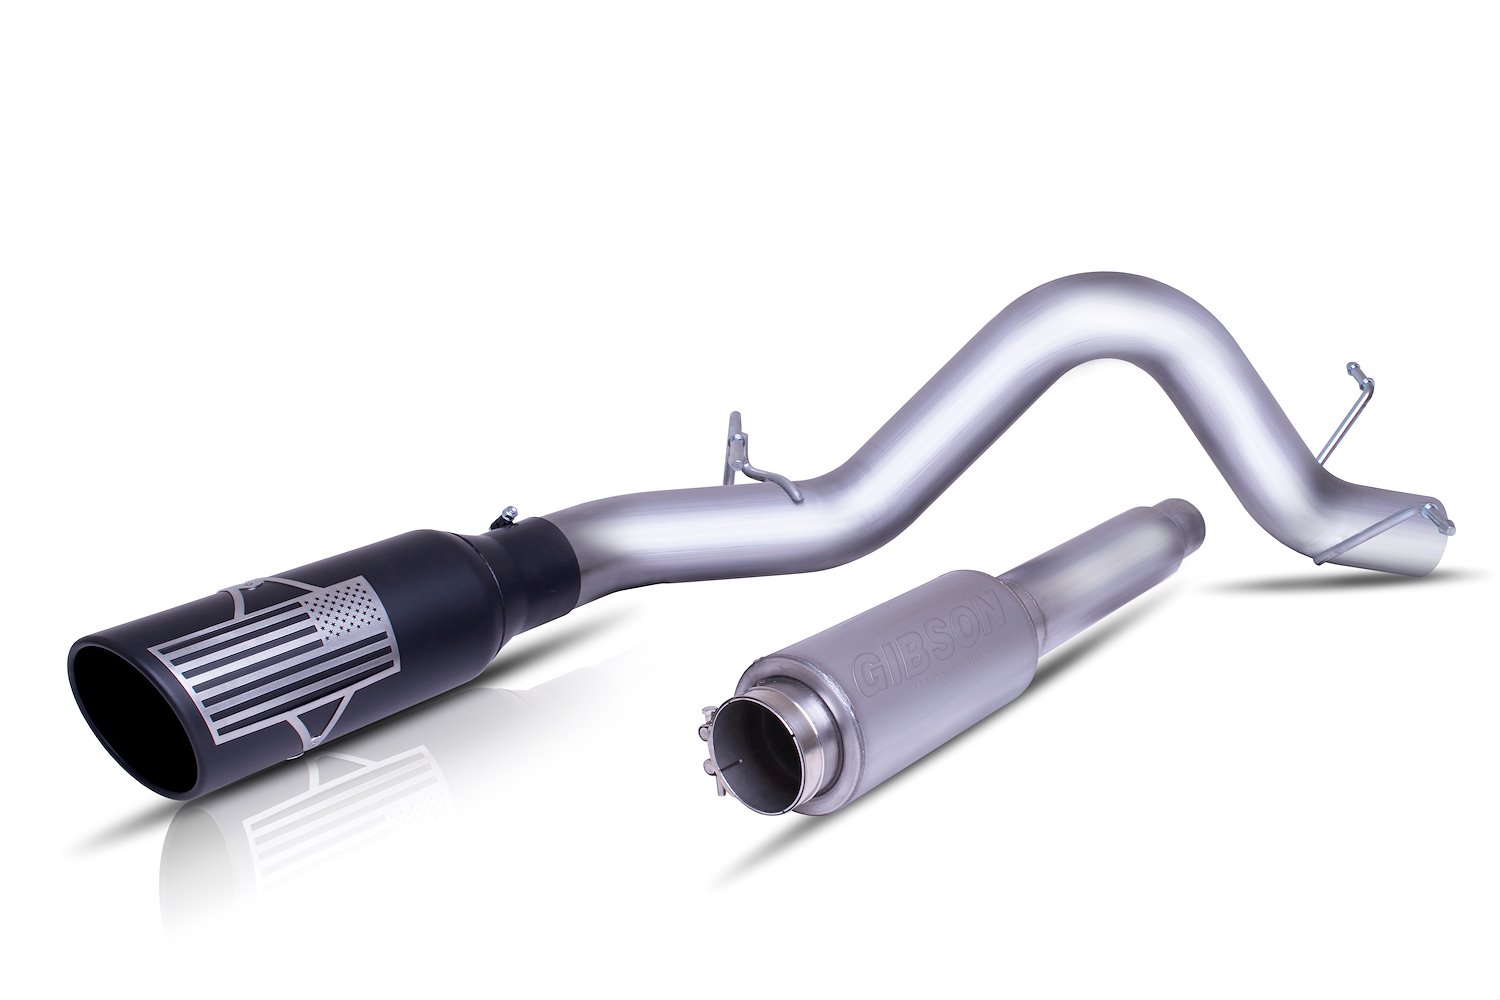 Patriot Series Cat-Back Exhaust System for 2007-Up Chevy Silverado/GMC Sierra Regular Cab with 6 ft. 6.7 in. Bed